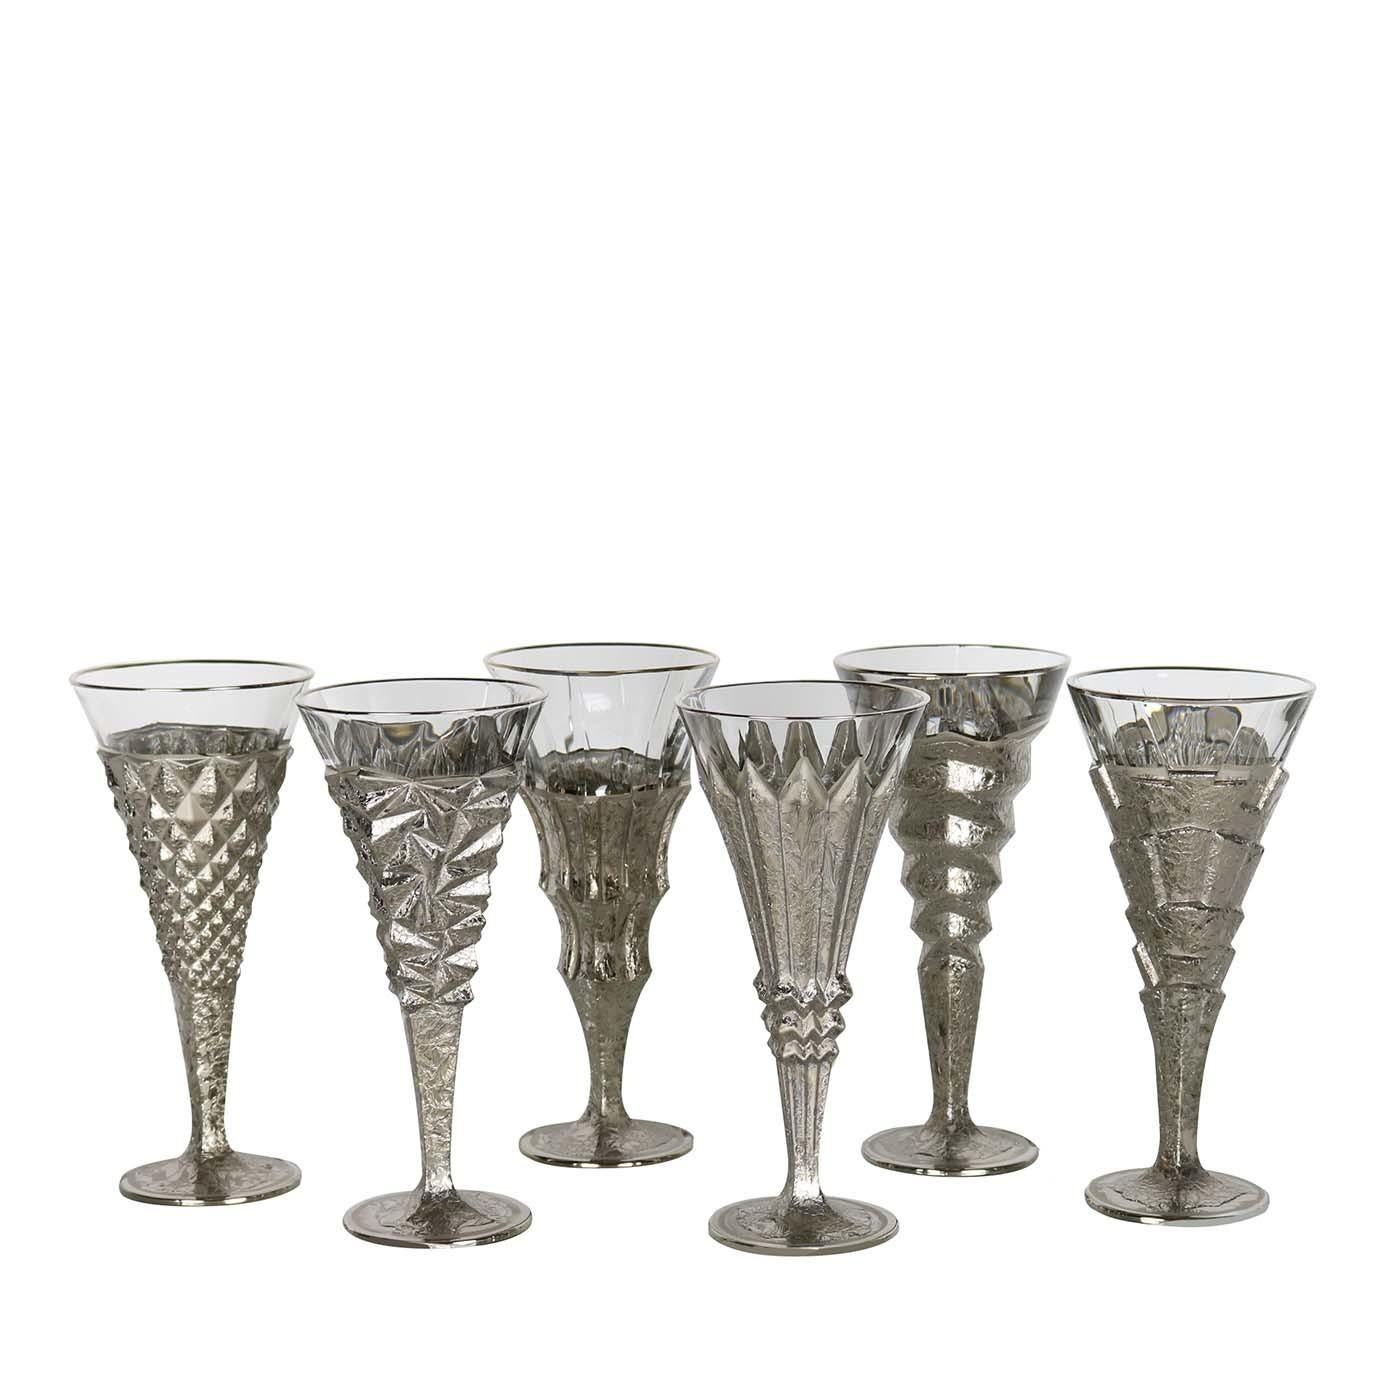 This set of six flutes is part of the Capriccio collection and comprises assorted pieces that are each a one-of-a-kind objects of functional design. They were carved from solid glass into six striking shapes that create abstract decorations on the